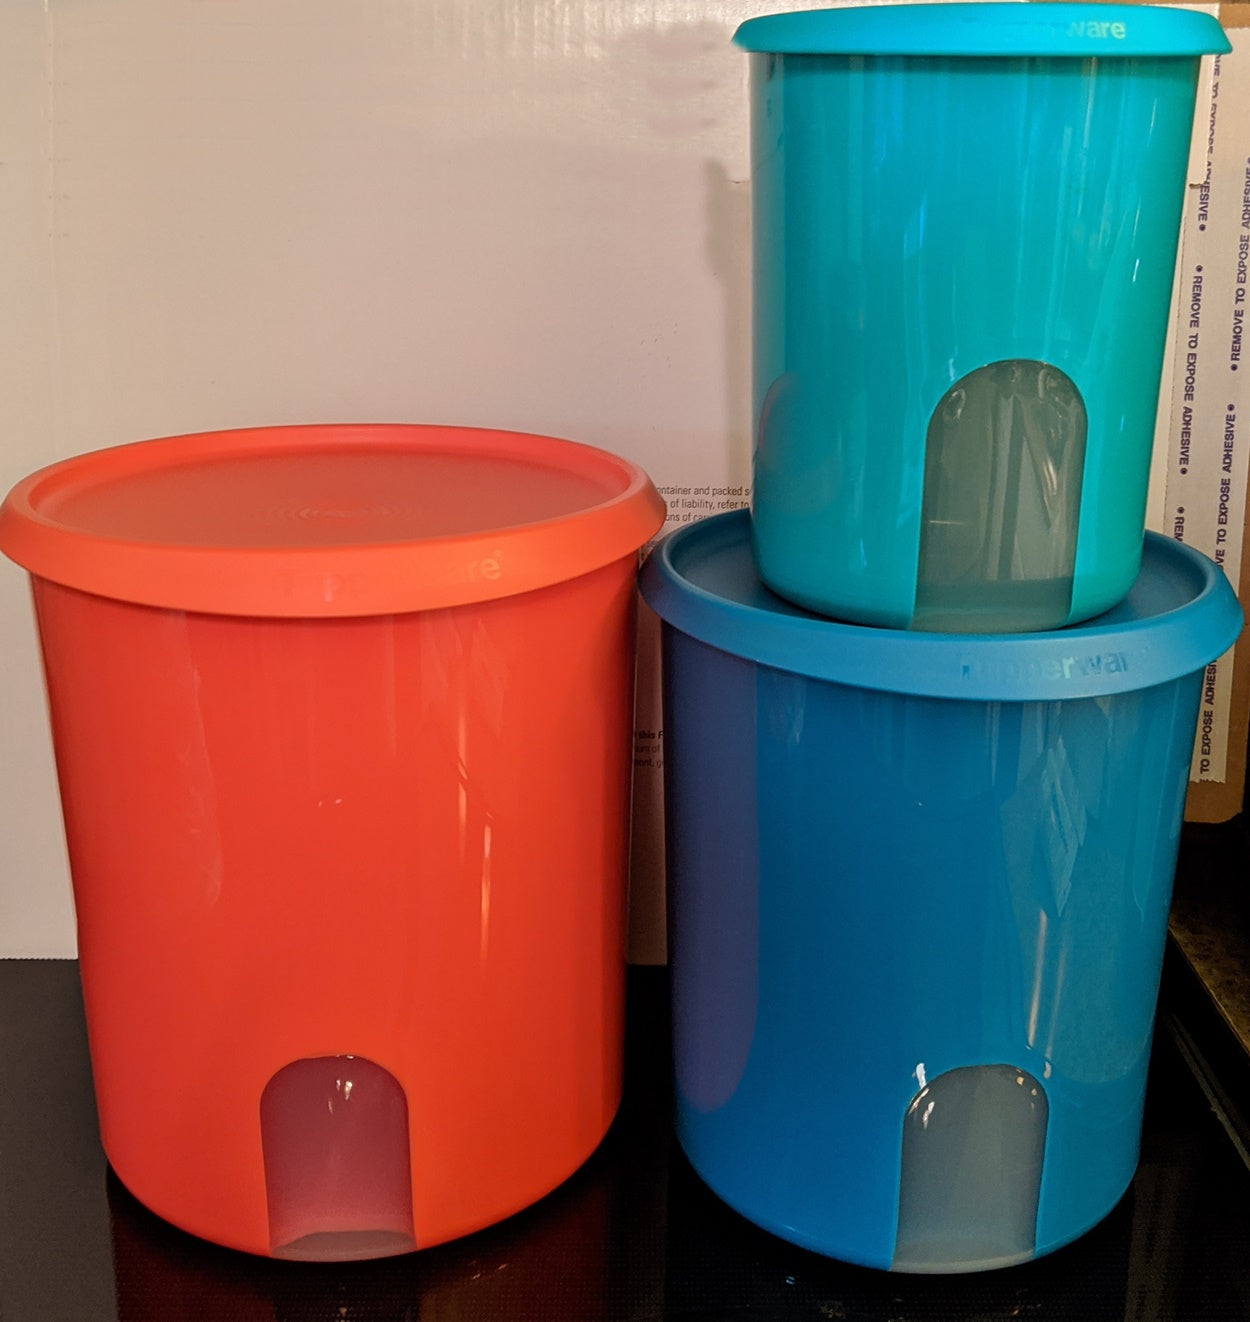 Tupperware Nesting Canisters Classic Sheer With Seals 